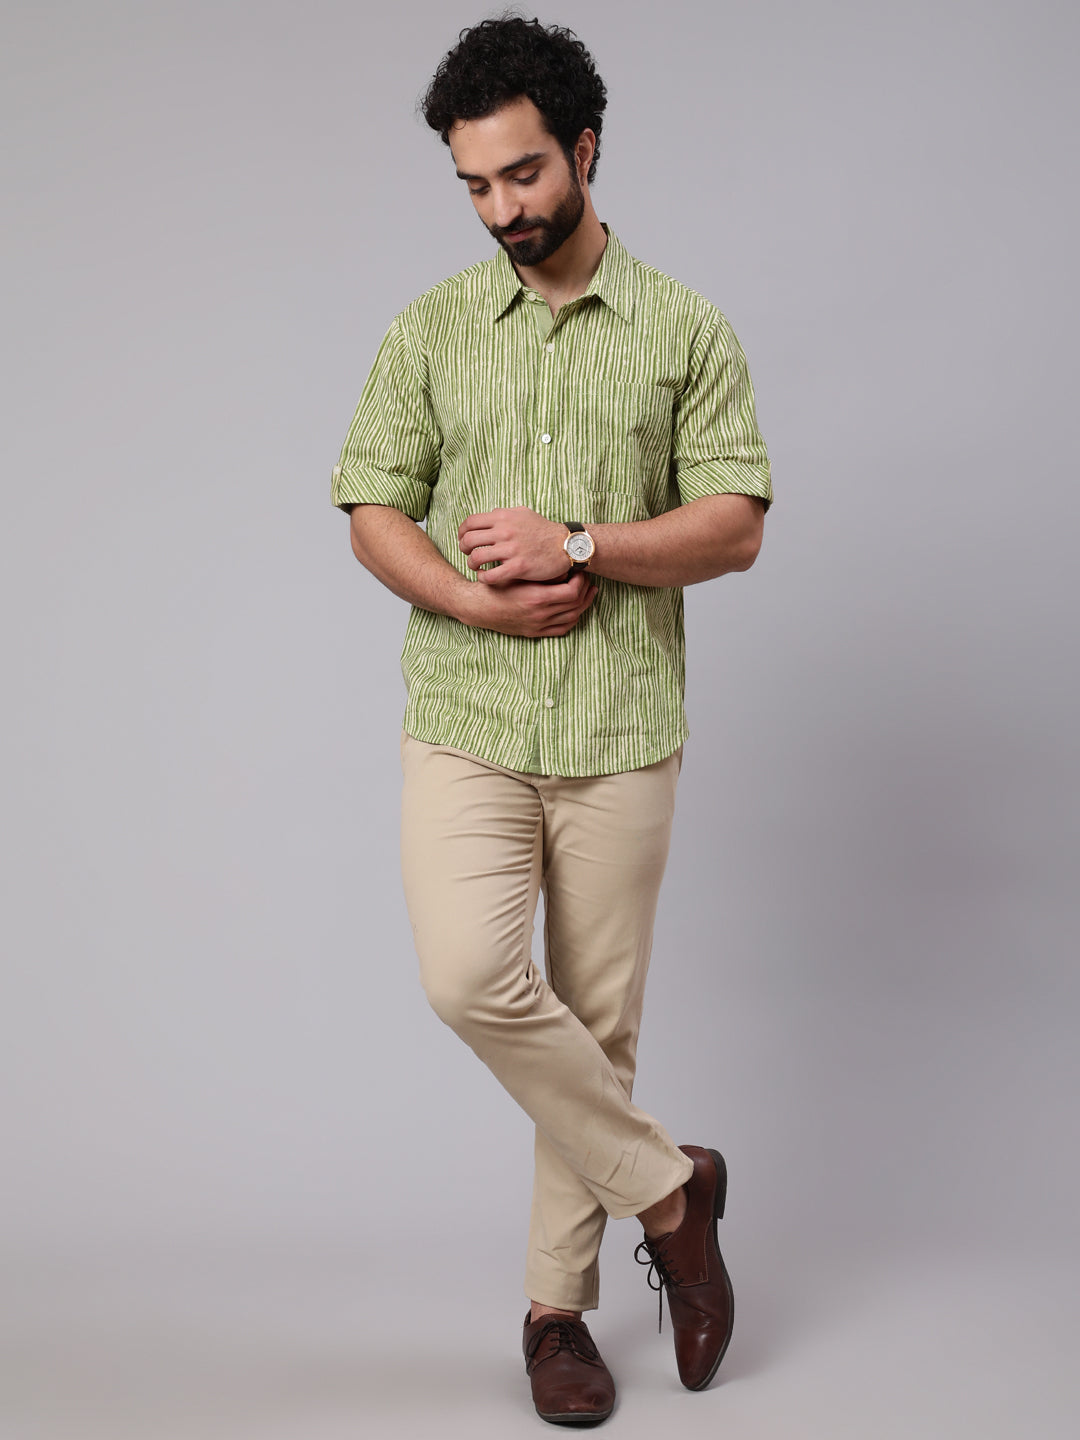 Men's Green Striped Shirt With Roll-Up Sleeve - Aks Men